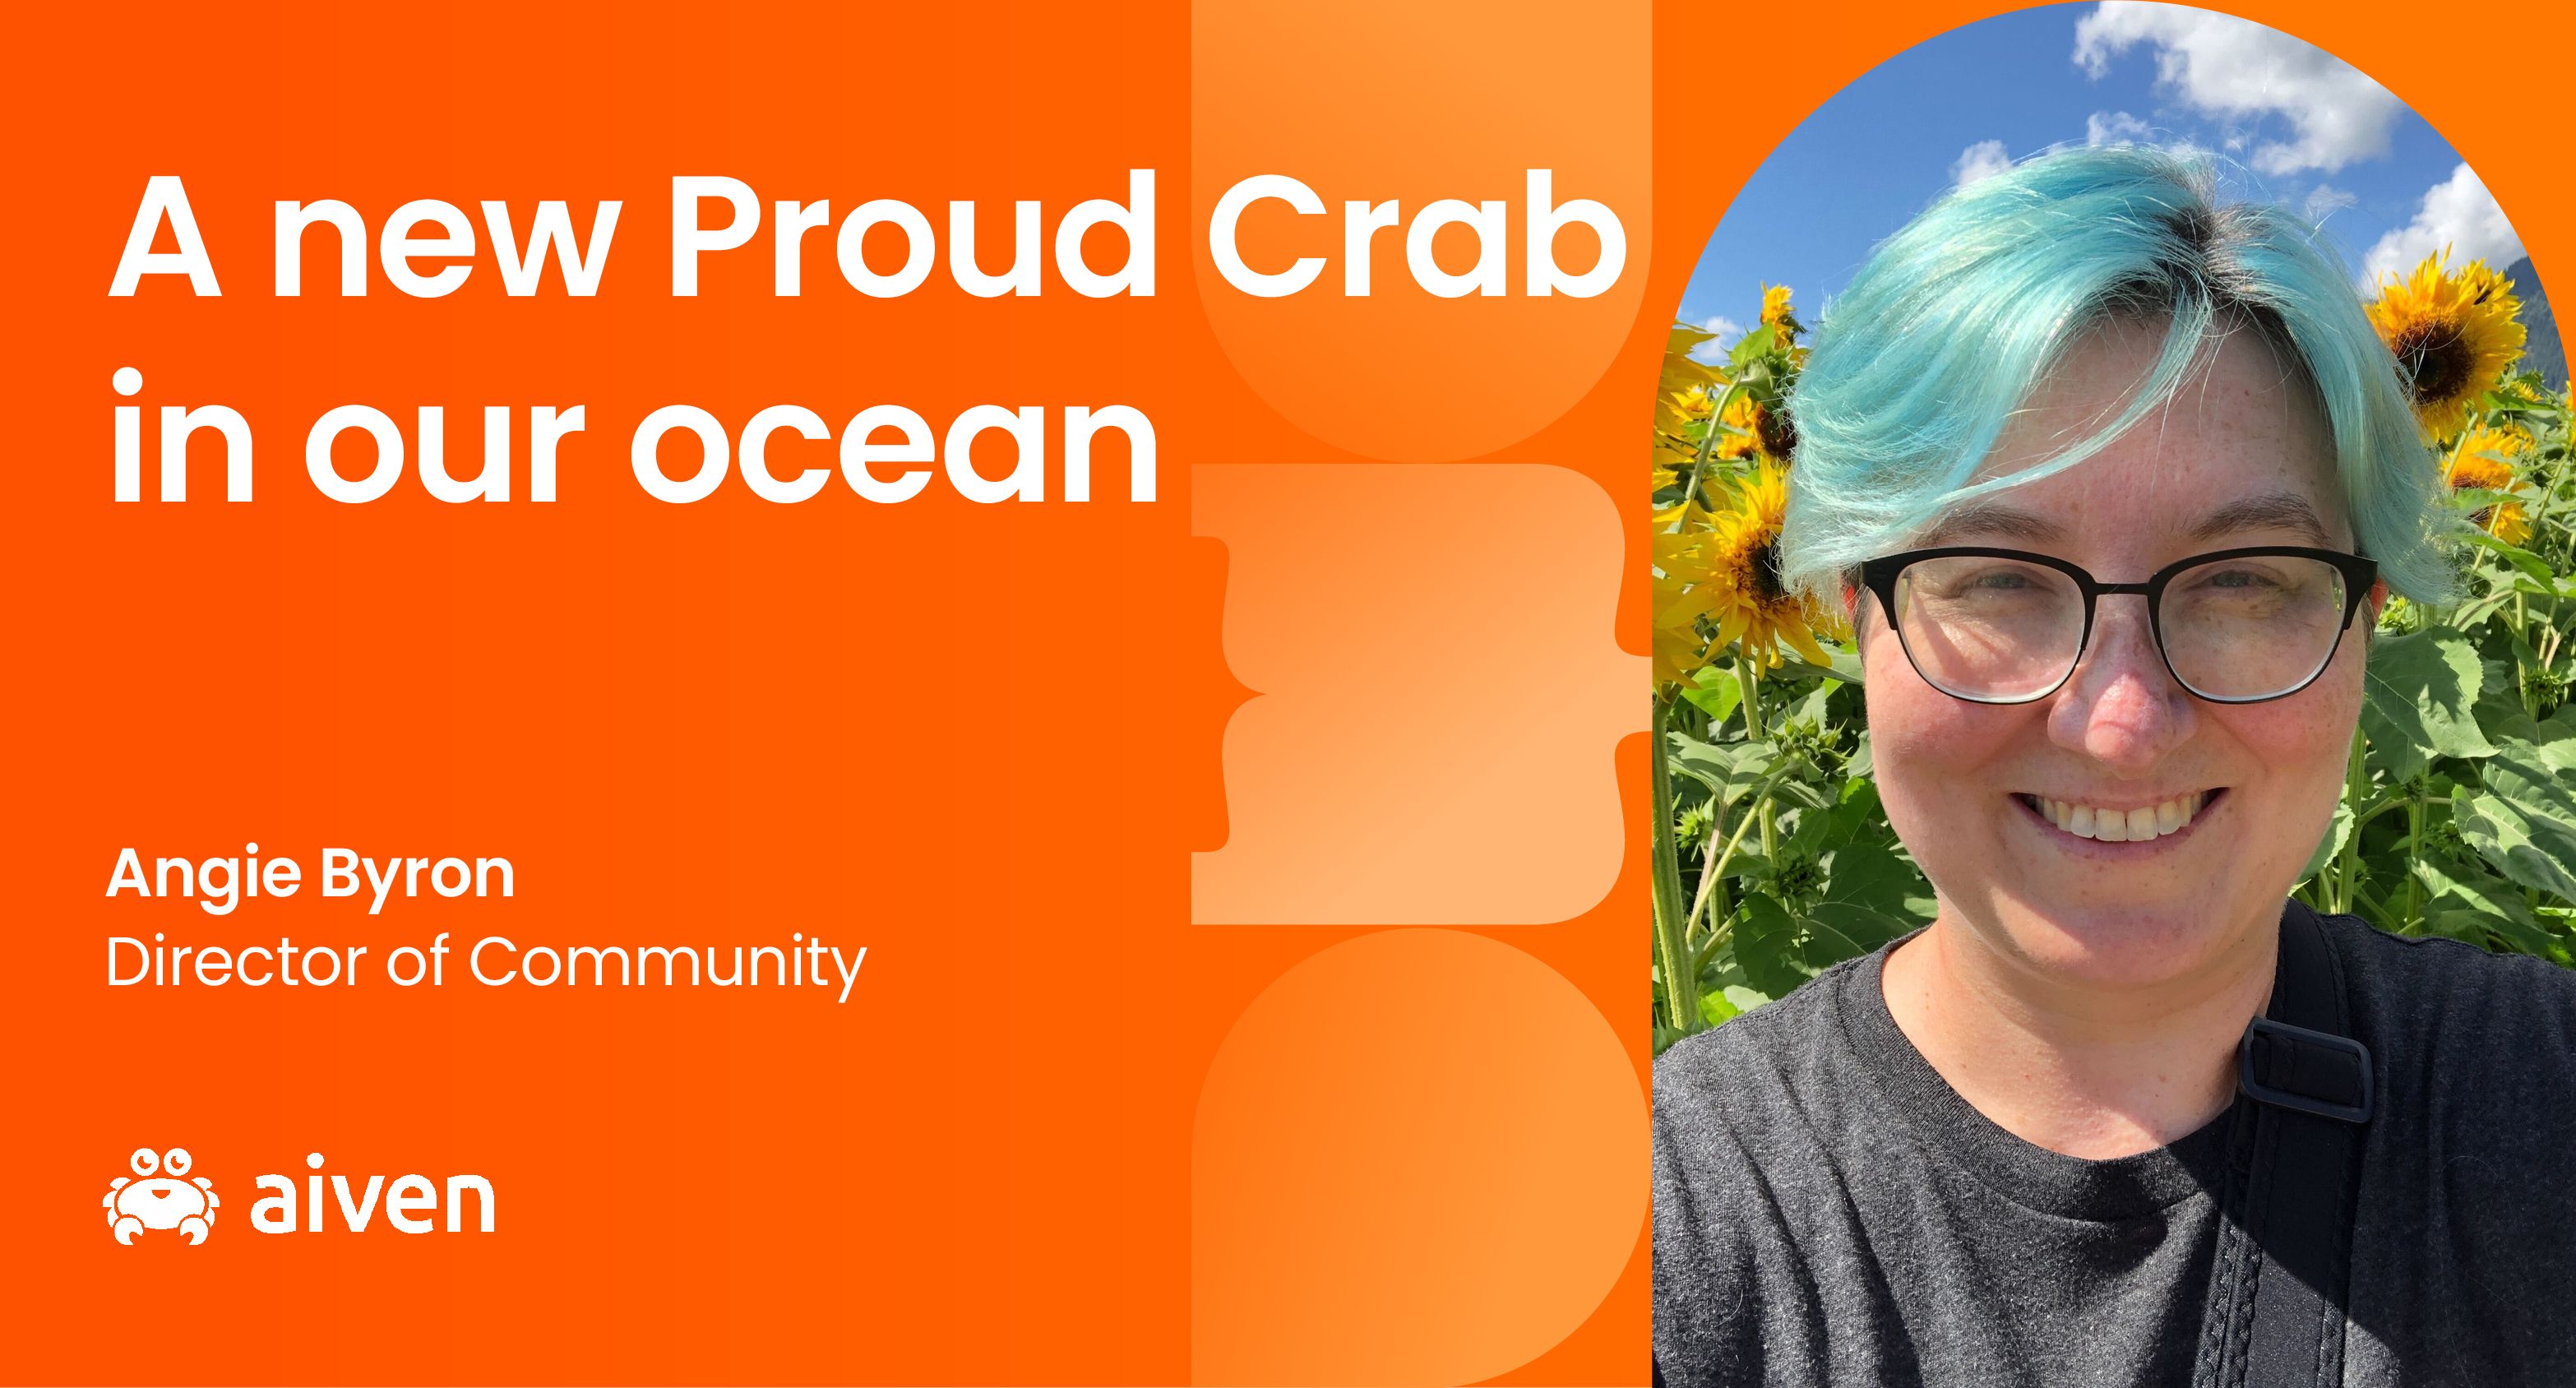 Angie Byron, Director of Community, Proud Crabs, Aiven, Aiven logo, Aiven LGBTQ+, DEI, Diversity Equity, Inclusion